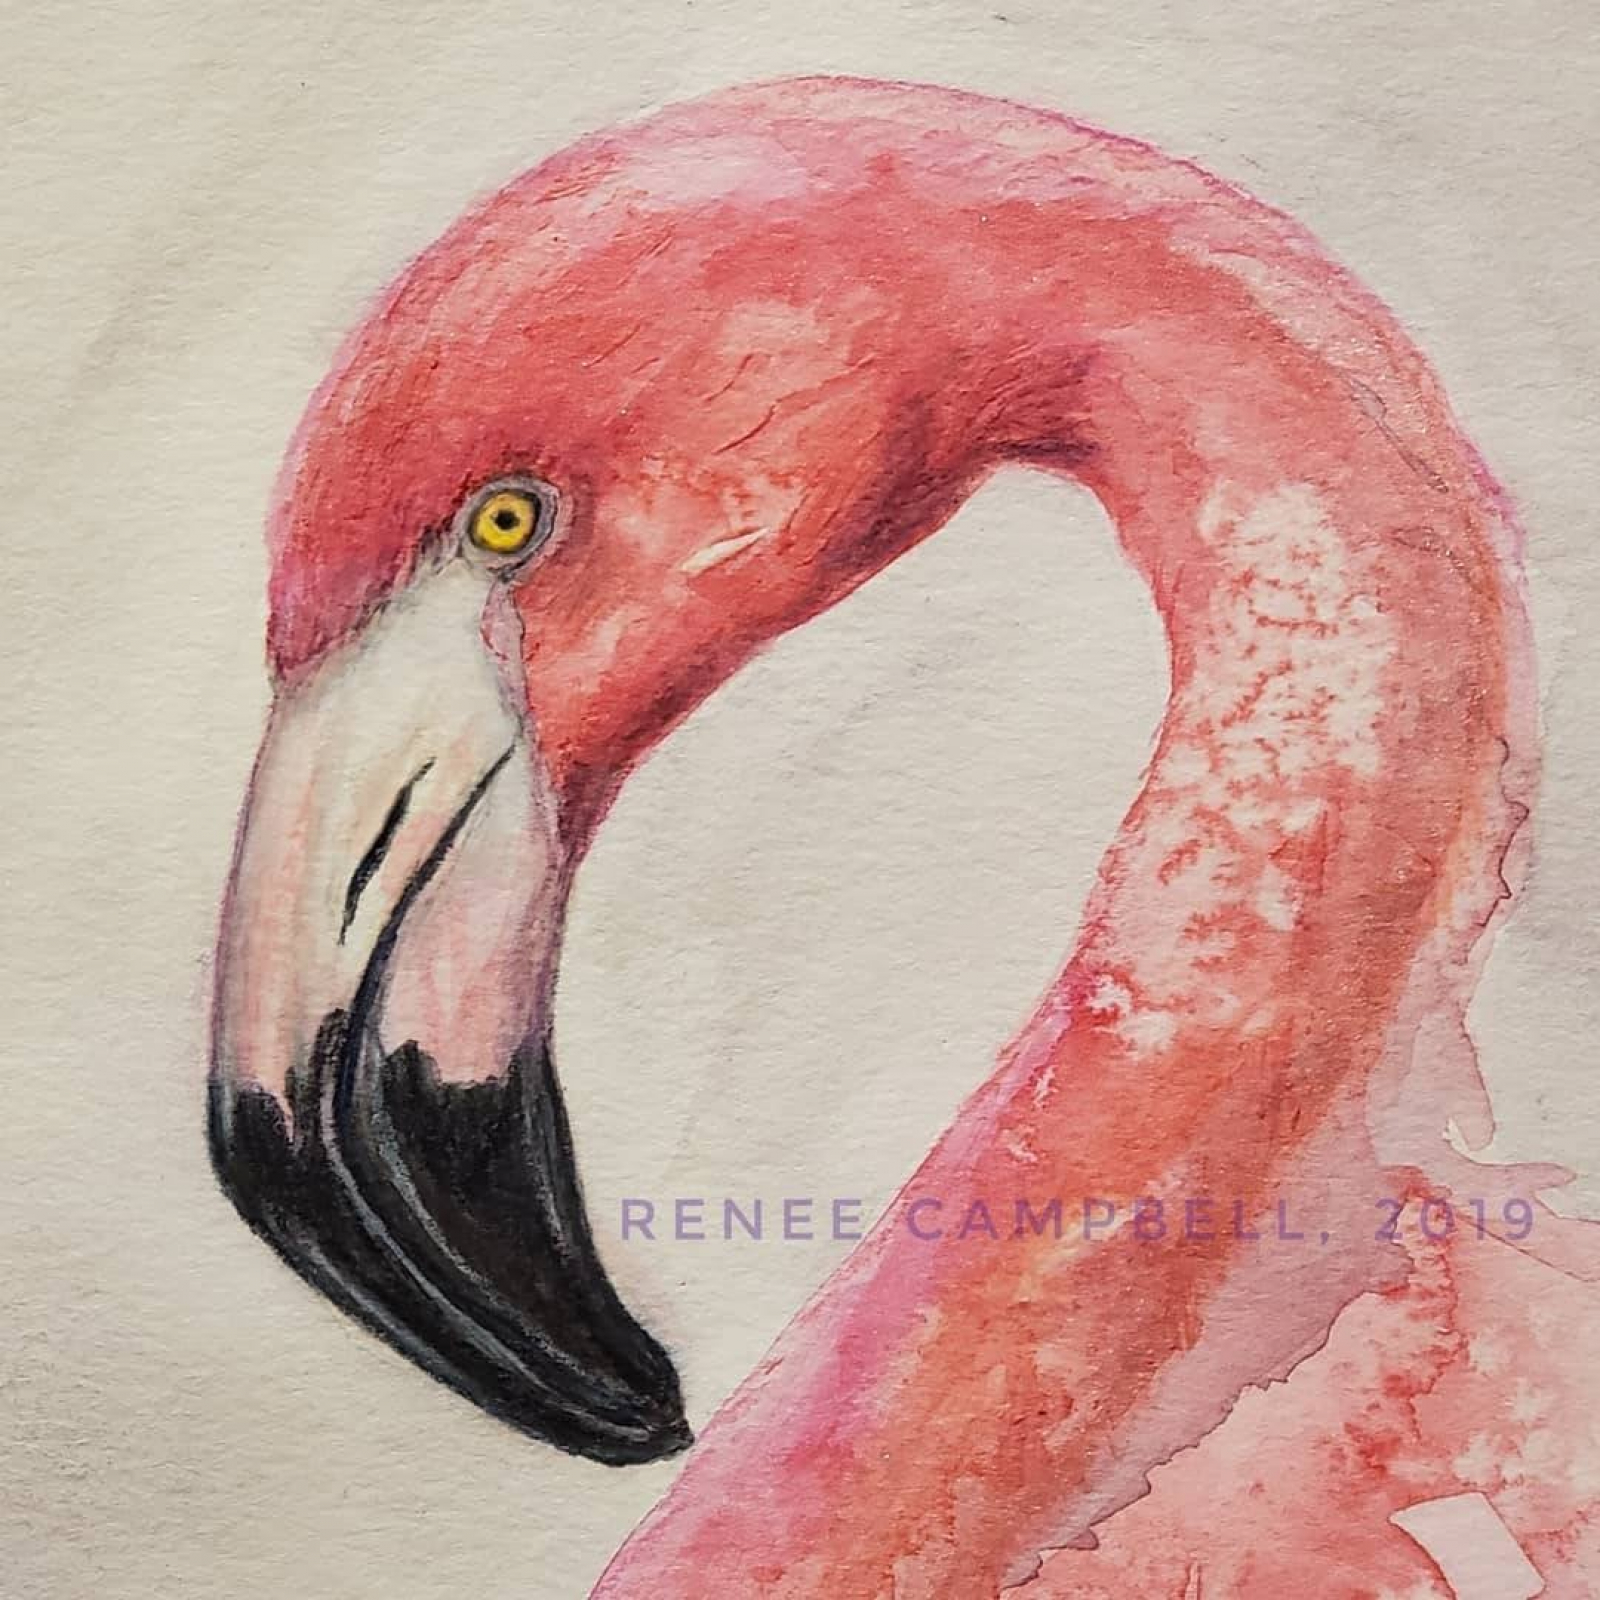 Watercolor original one of a kind small painting Weird home decor 4 x 6 inches #3 Flamingo ORIGINAL painting with gold accents